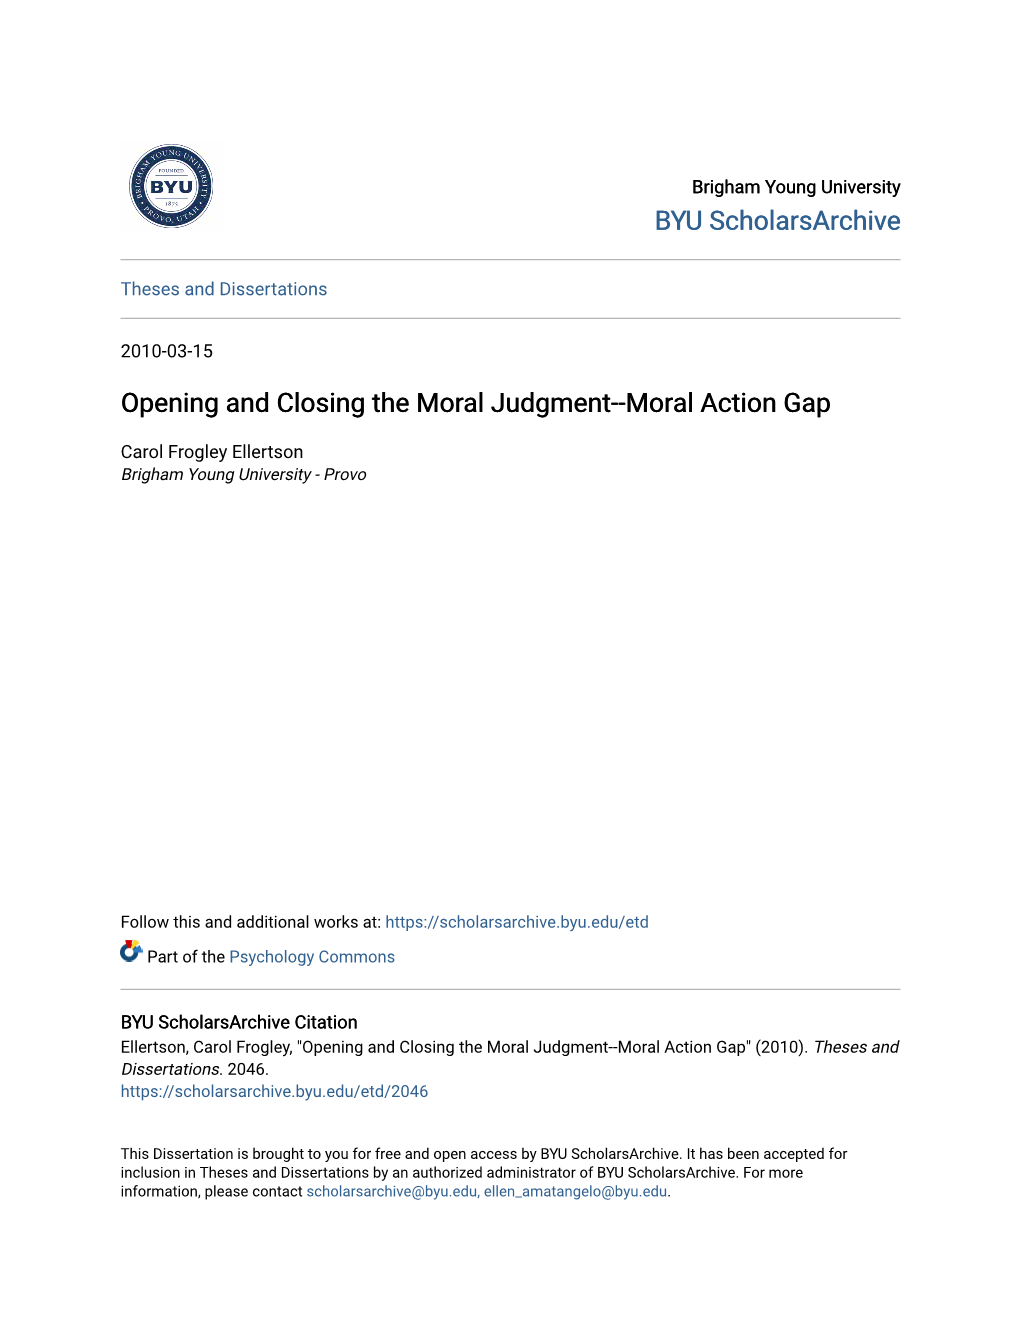 Opening and Closing the Moral Judgment--Moral Action Gap